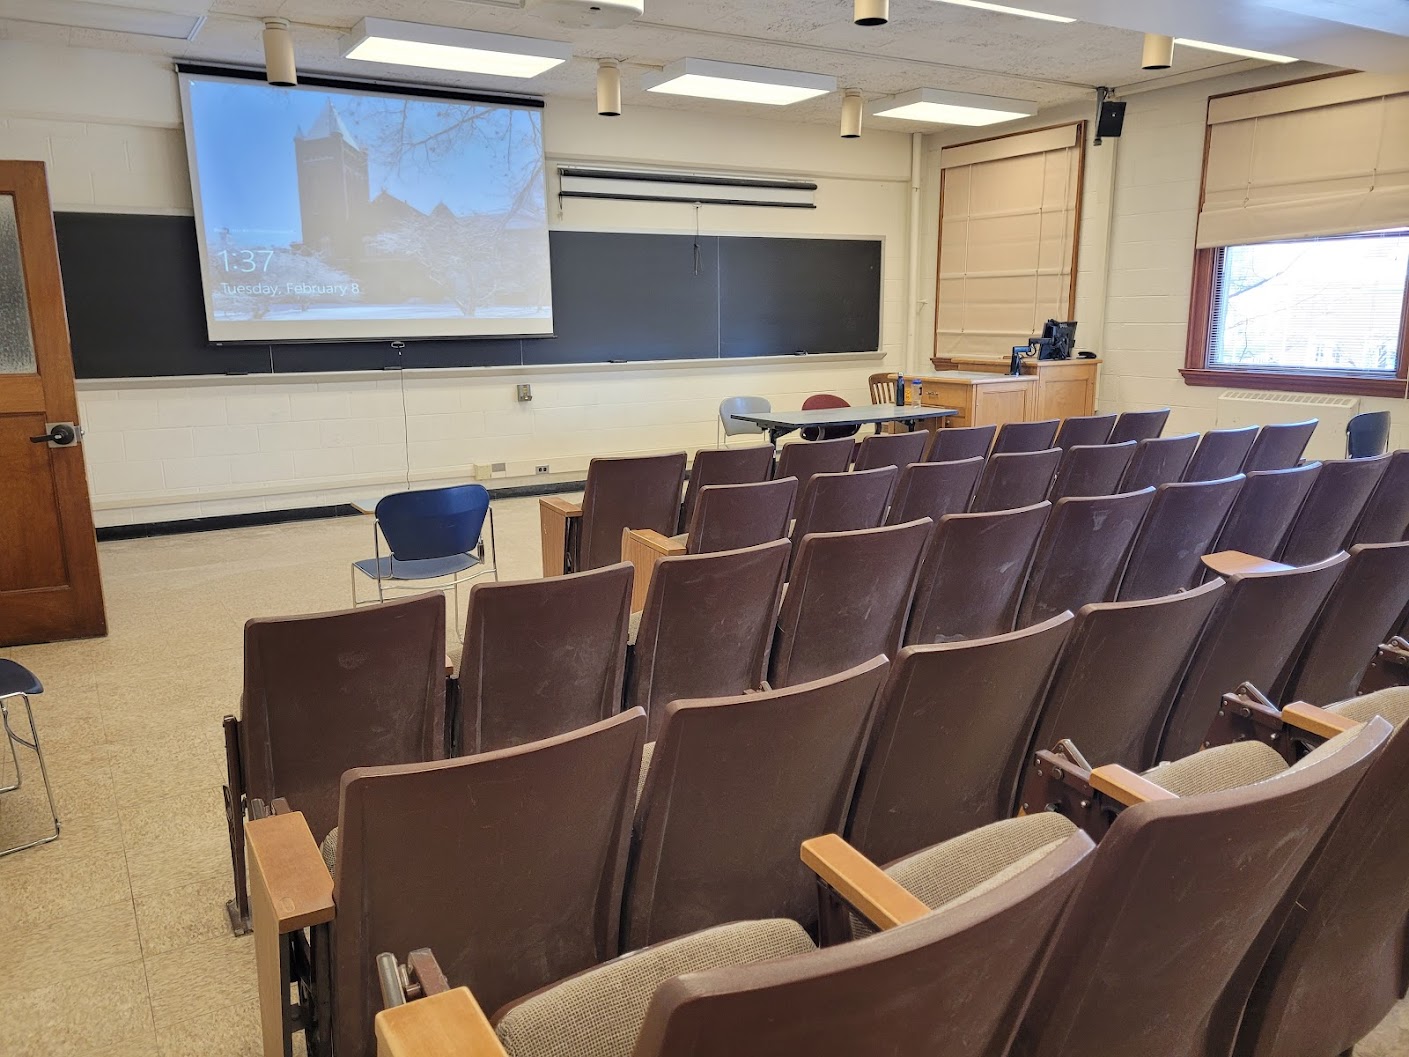 A view of the classroom with theatre auditorium seating, chalkboards, and an instructor table in front.